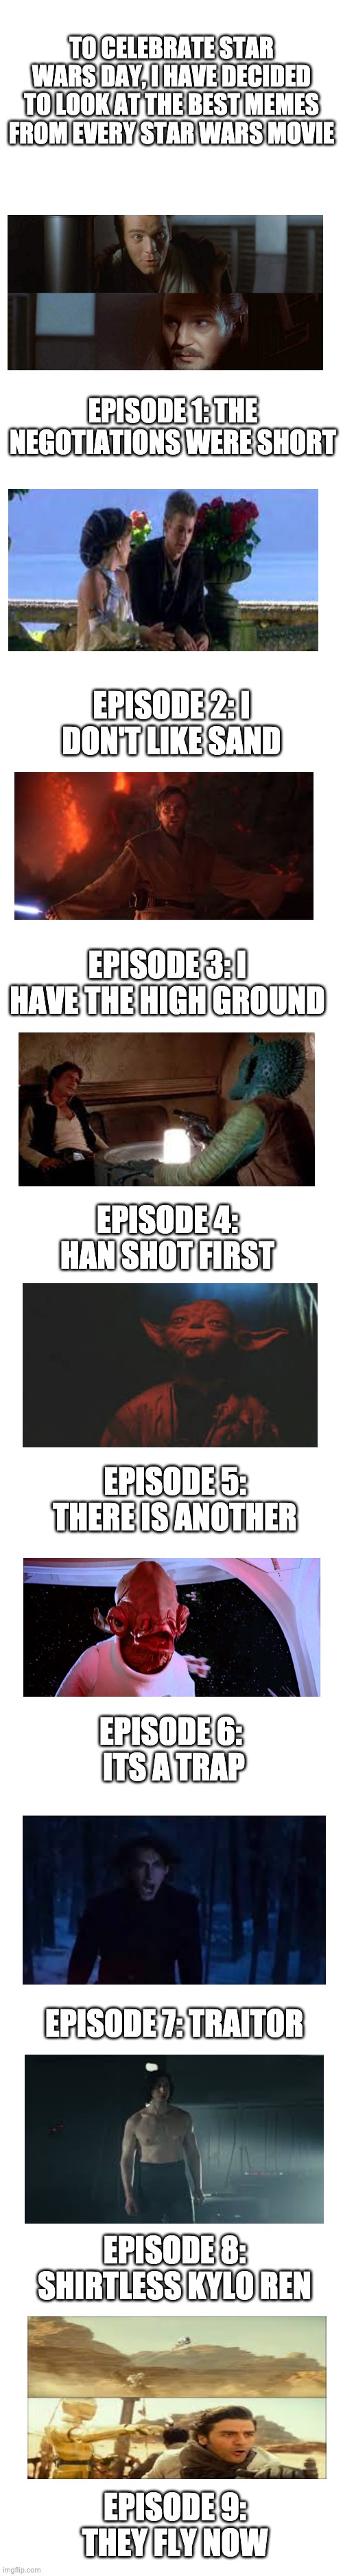 May The 4th Be With You | TO CELEBRATE STAR WARS DAY, I HAVE DECIDED TO LOOK AT THE BEST MEMES FROM EVERY STAR WARS MOVIE; EPISODE 1: THE NEGOTIATIONS WERE SHORT; EPISODE 2: I DON'T LIKE SAND; EPISODE 3: I HAVE THE HIGH GROUND; EPISODE 4: HAN SHOT FIRST; EPISODE 5: THERE IS ANOTHER; EPISODE 6:  ITS A TRAP; EPISODE 7: TRAITOR; EPISODE 8: SHIRTLESS KYLO REN; EPISODE 9: THEY FLY NOW | image tagged in blank white template,may the 4th,star wars memes | made w/ Imgflip meme maker